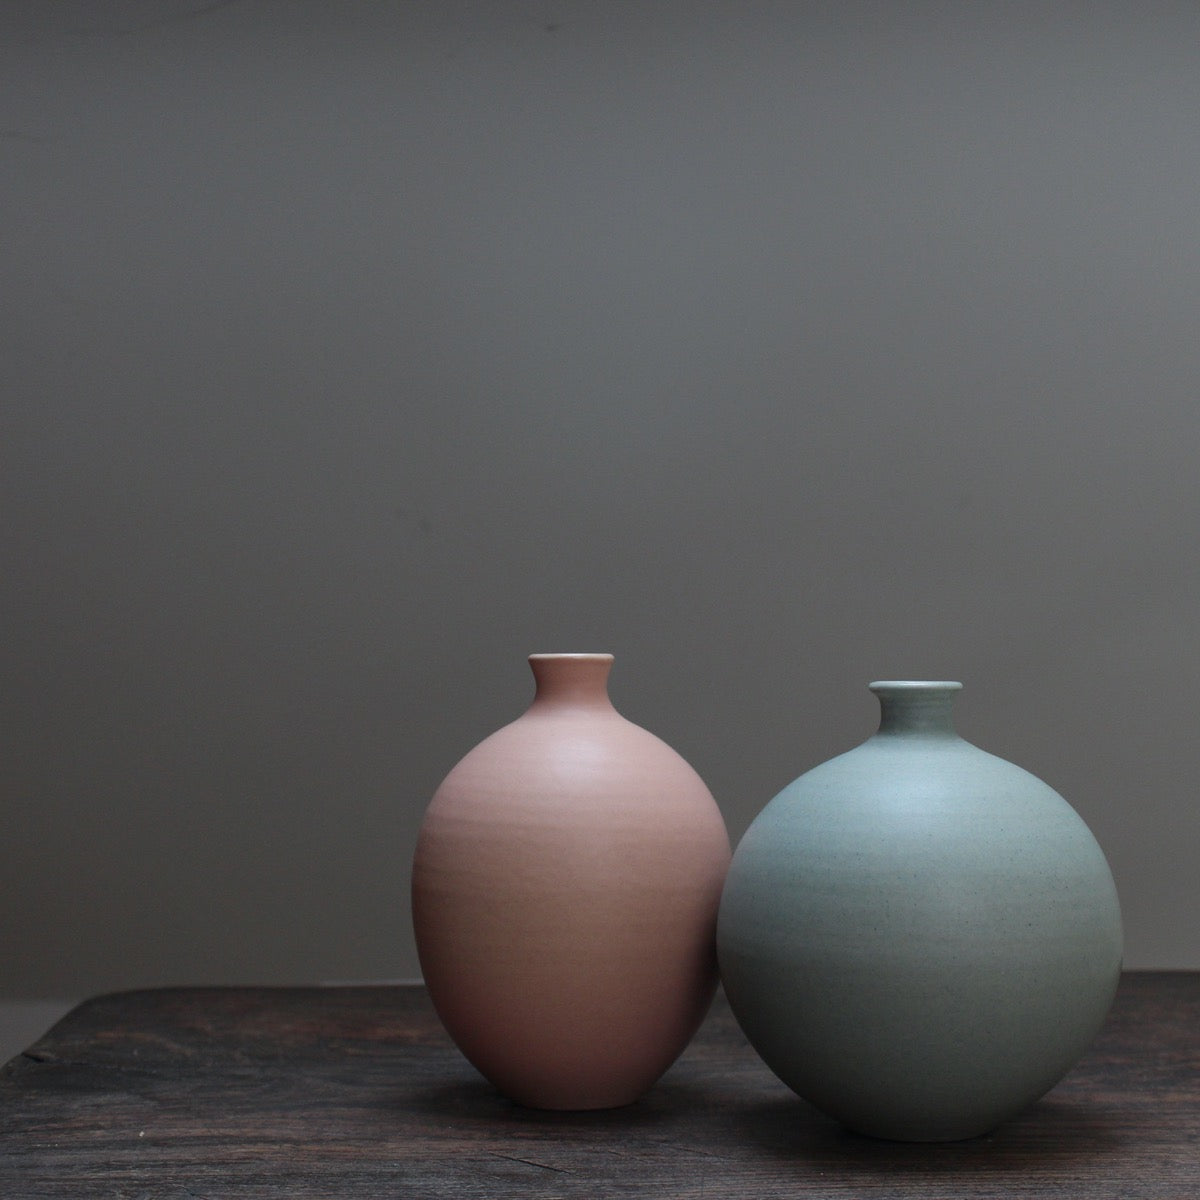 Two ceramic bottles on a wooden table - an oval shaped pale pink one and a round light green